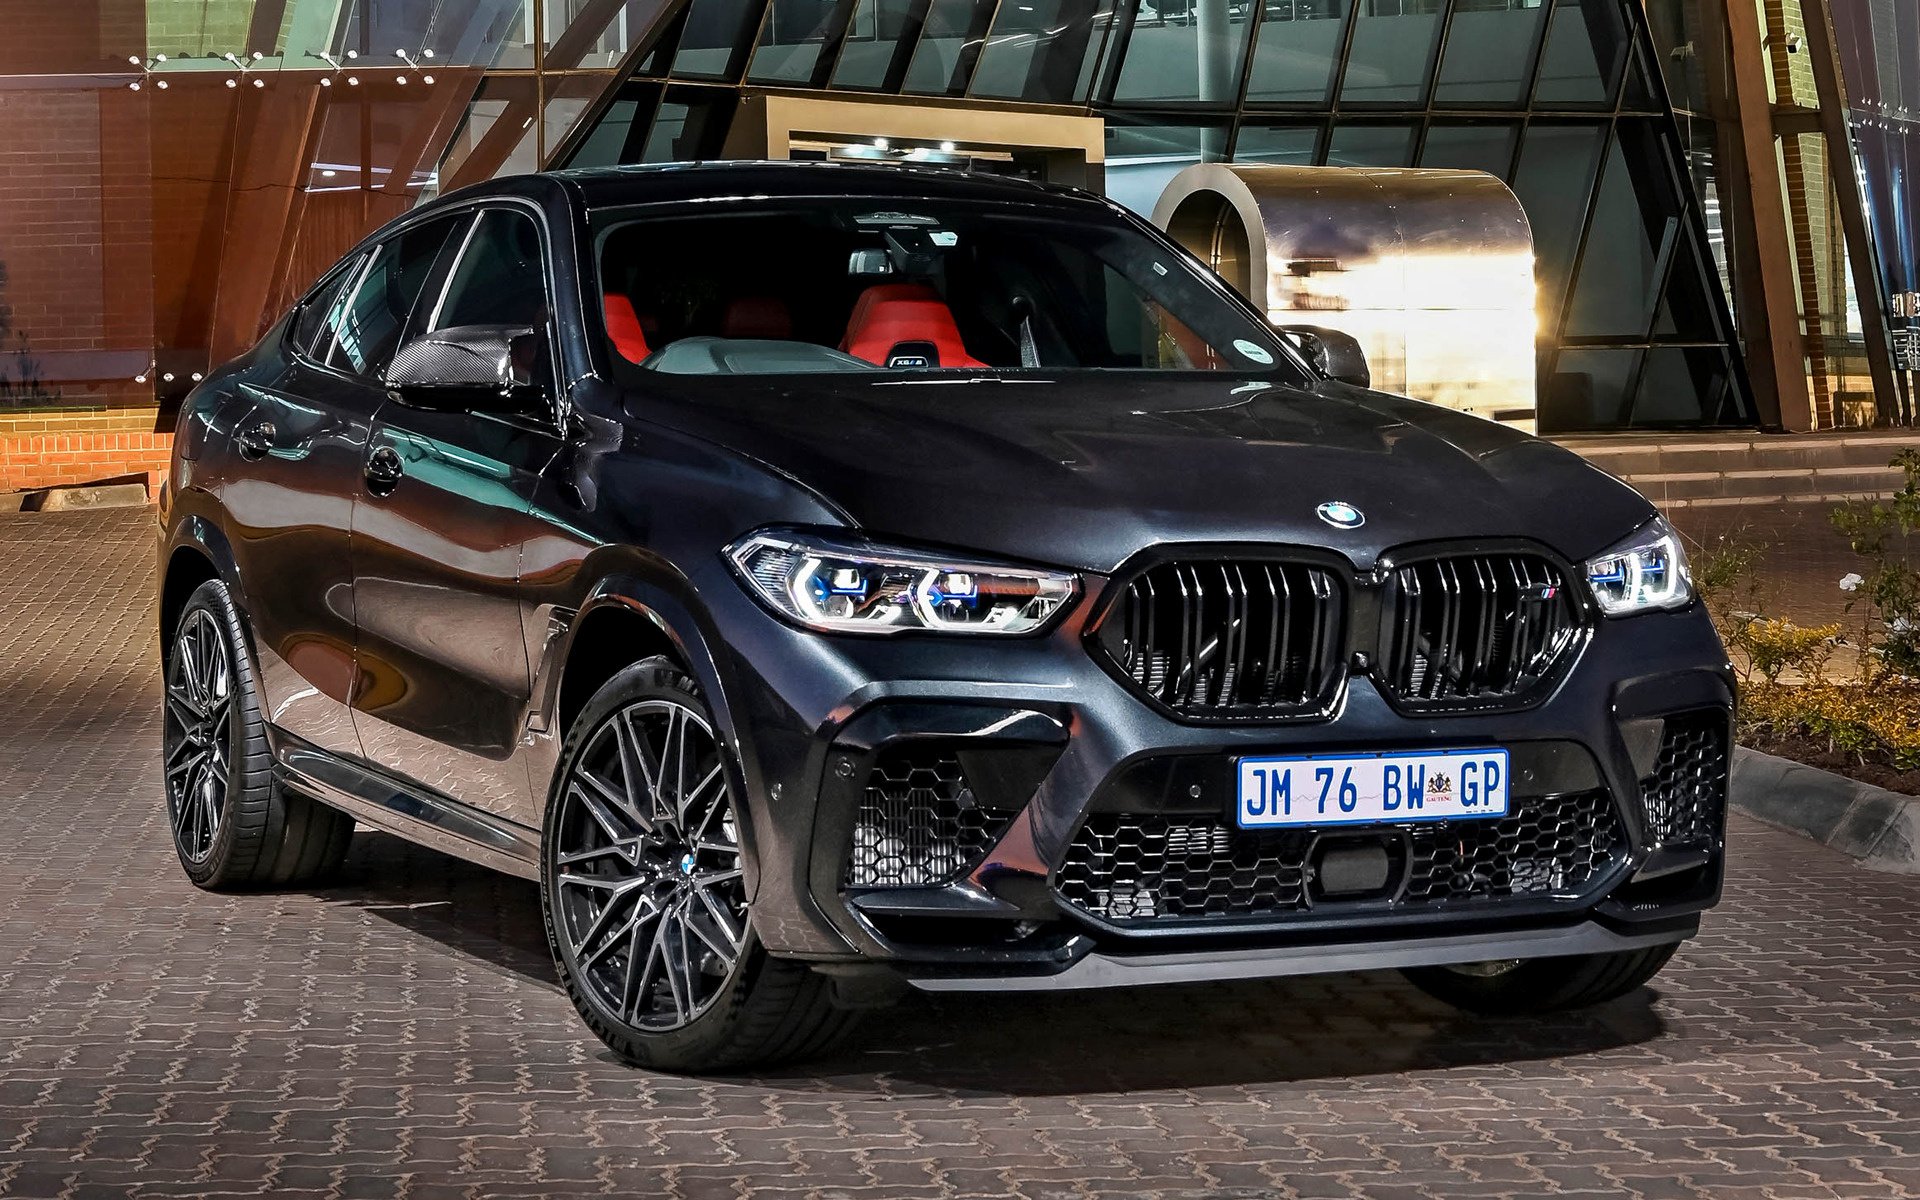 X6 competition. БМВ x6m 2021. BMW x6 m 2021. BMW x6m 2022. БМВ x6m Competition 2021.